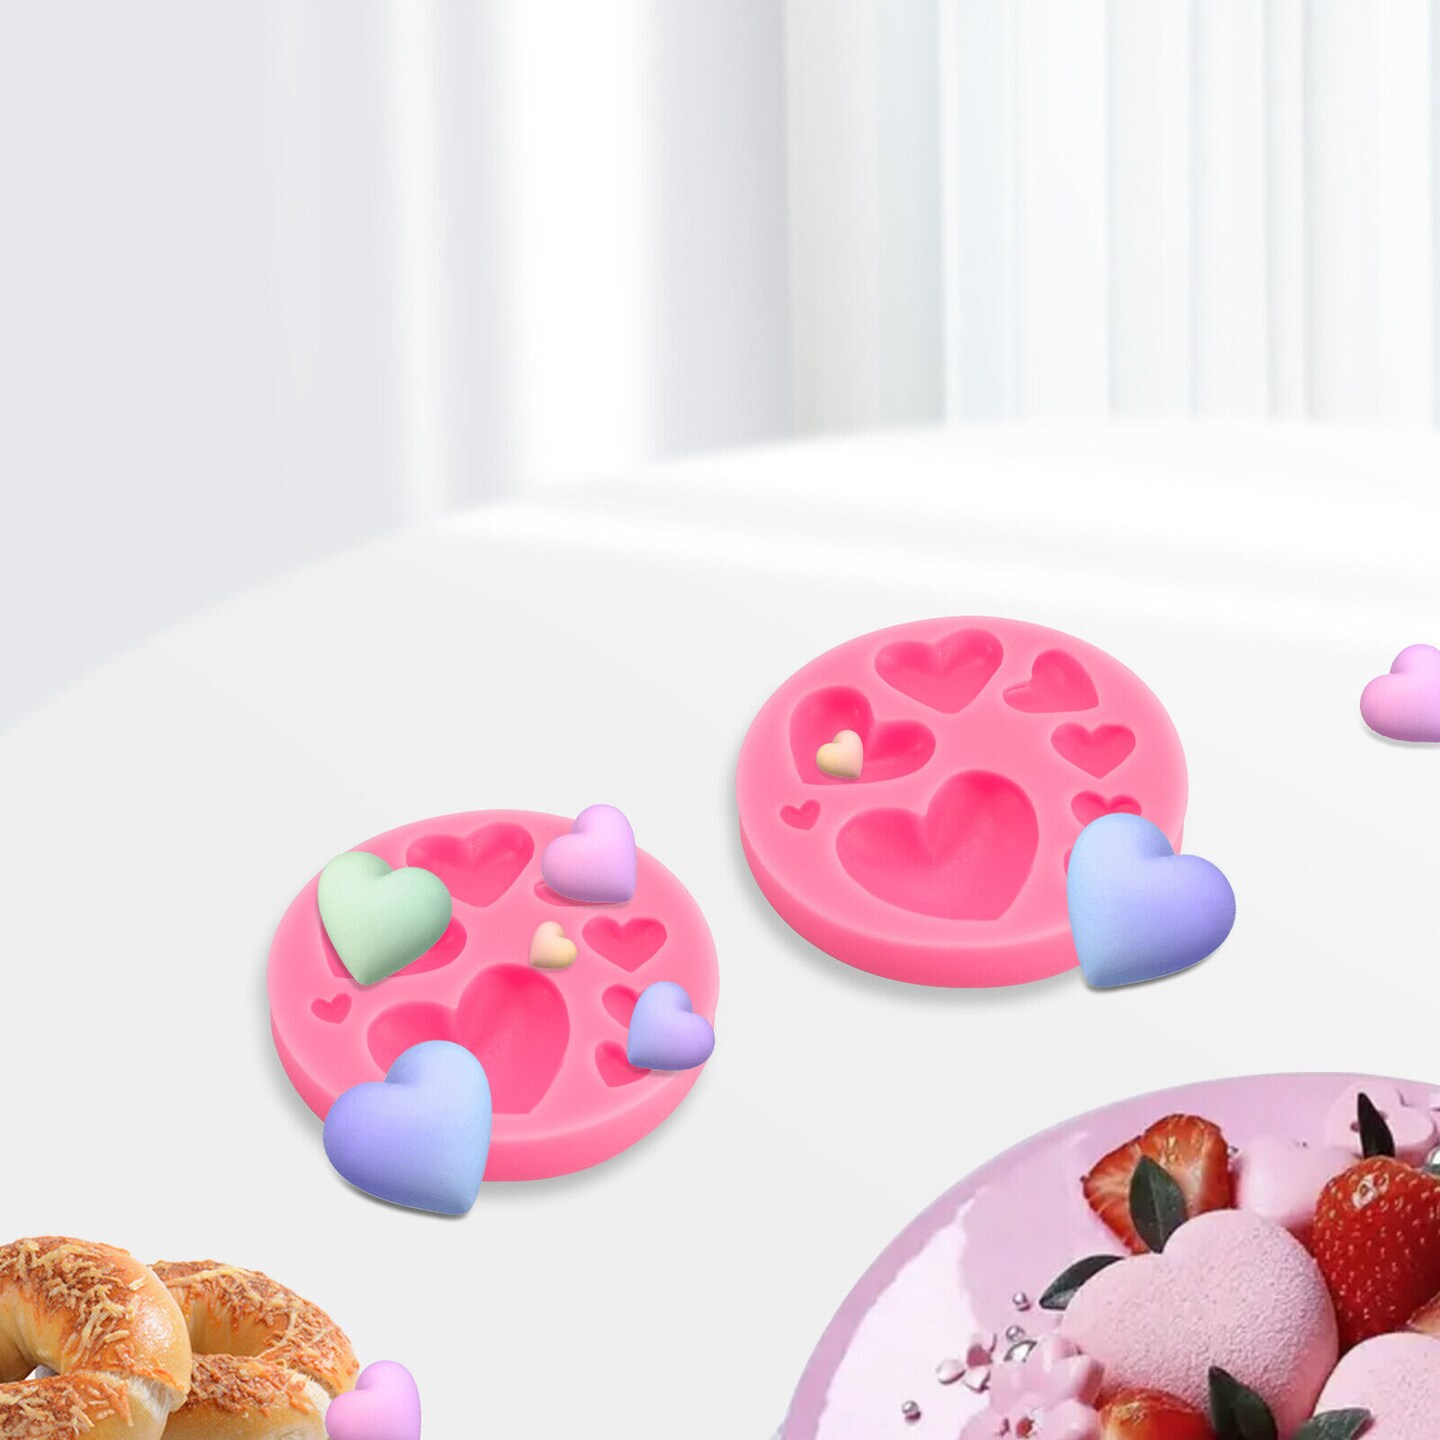 Kitcheniva 2* Heart Shape Silicone Molds for Cookie Decor